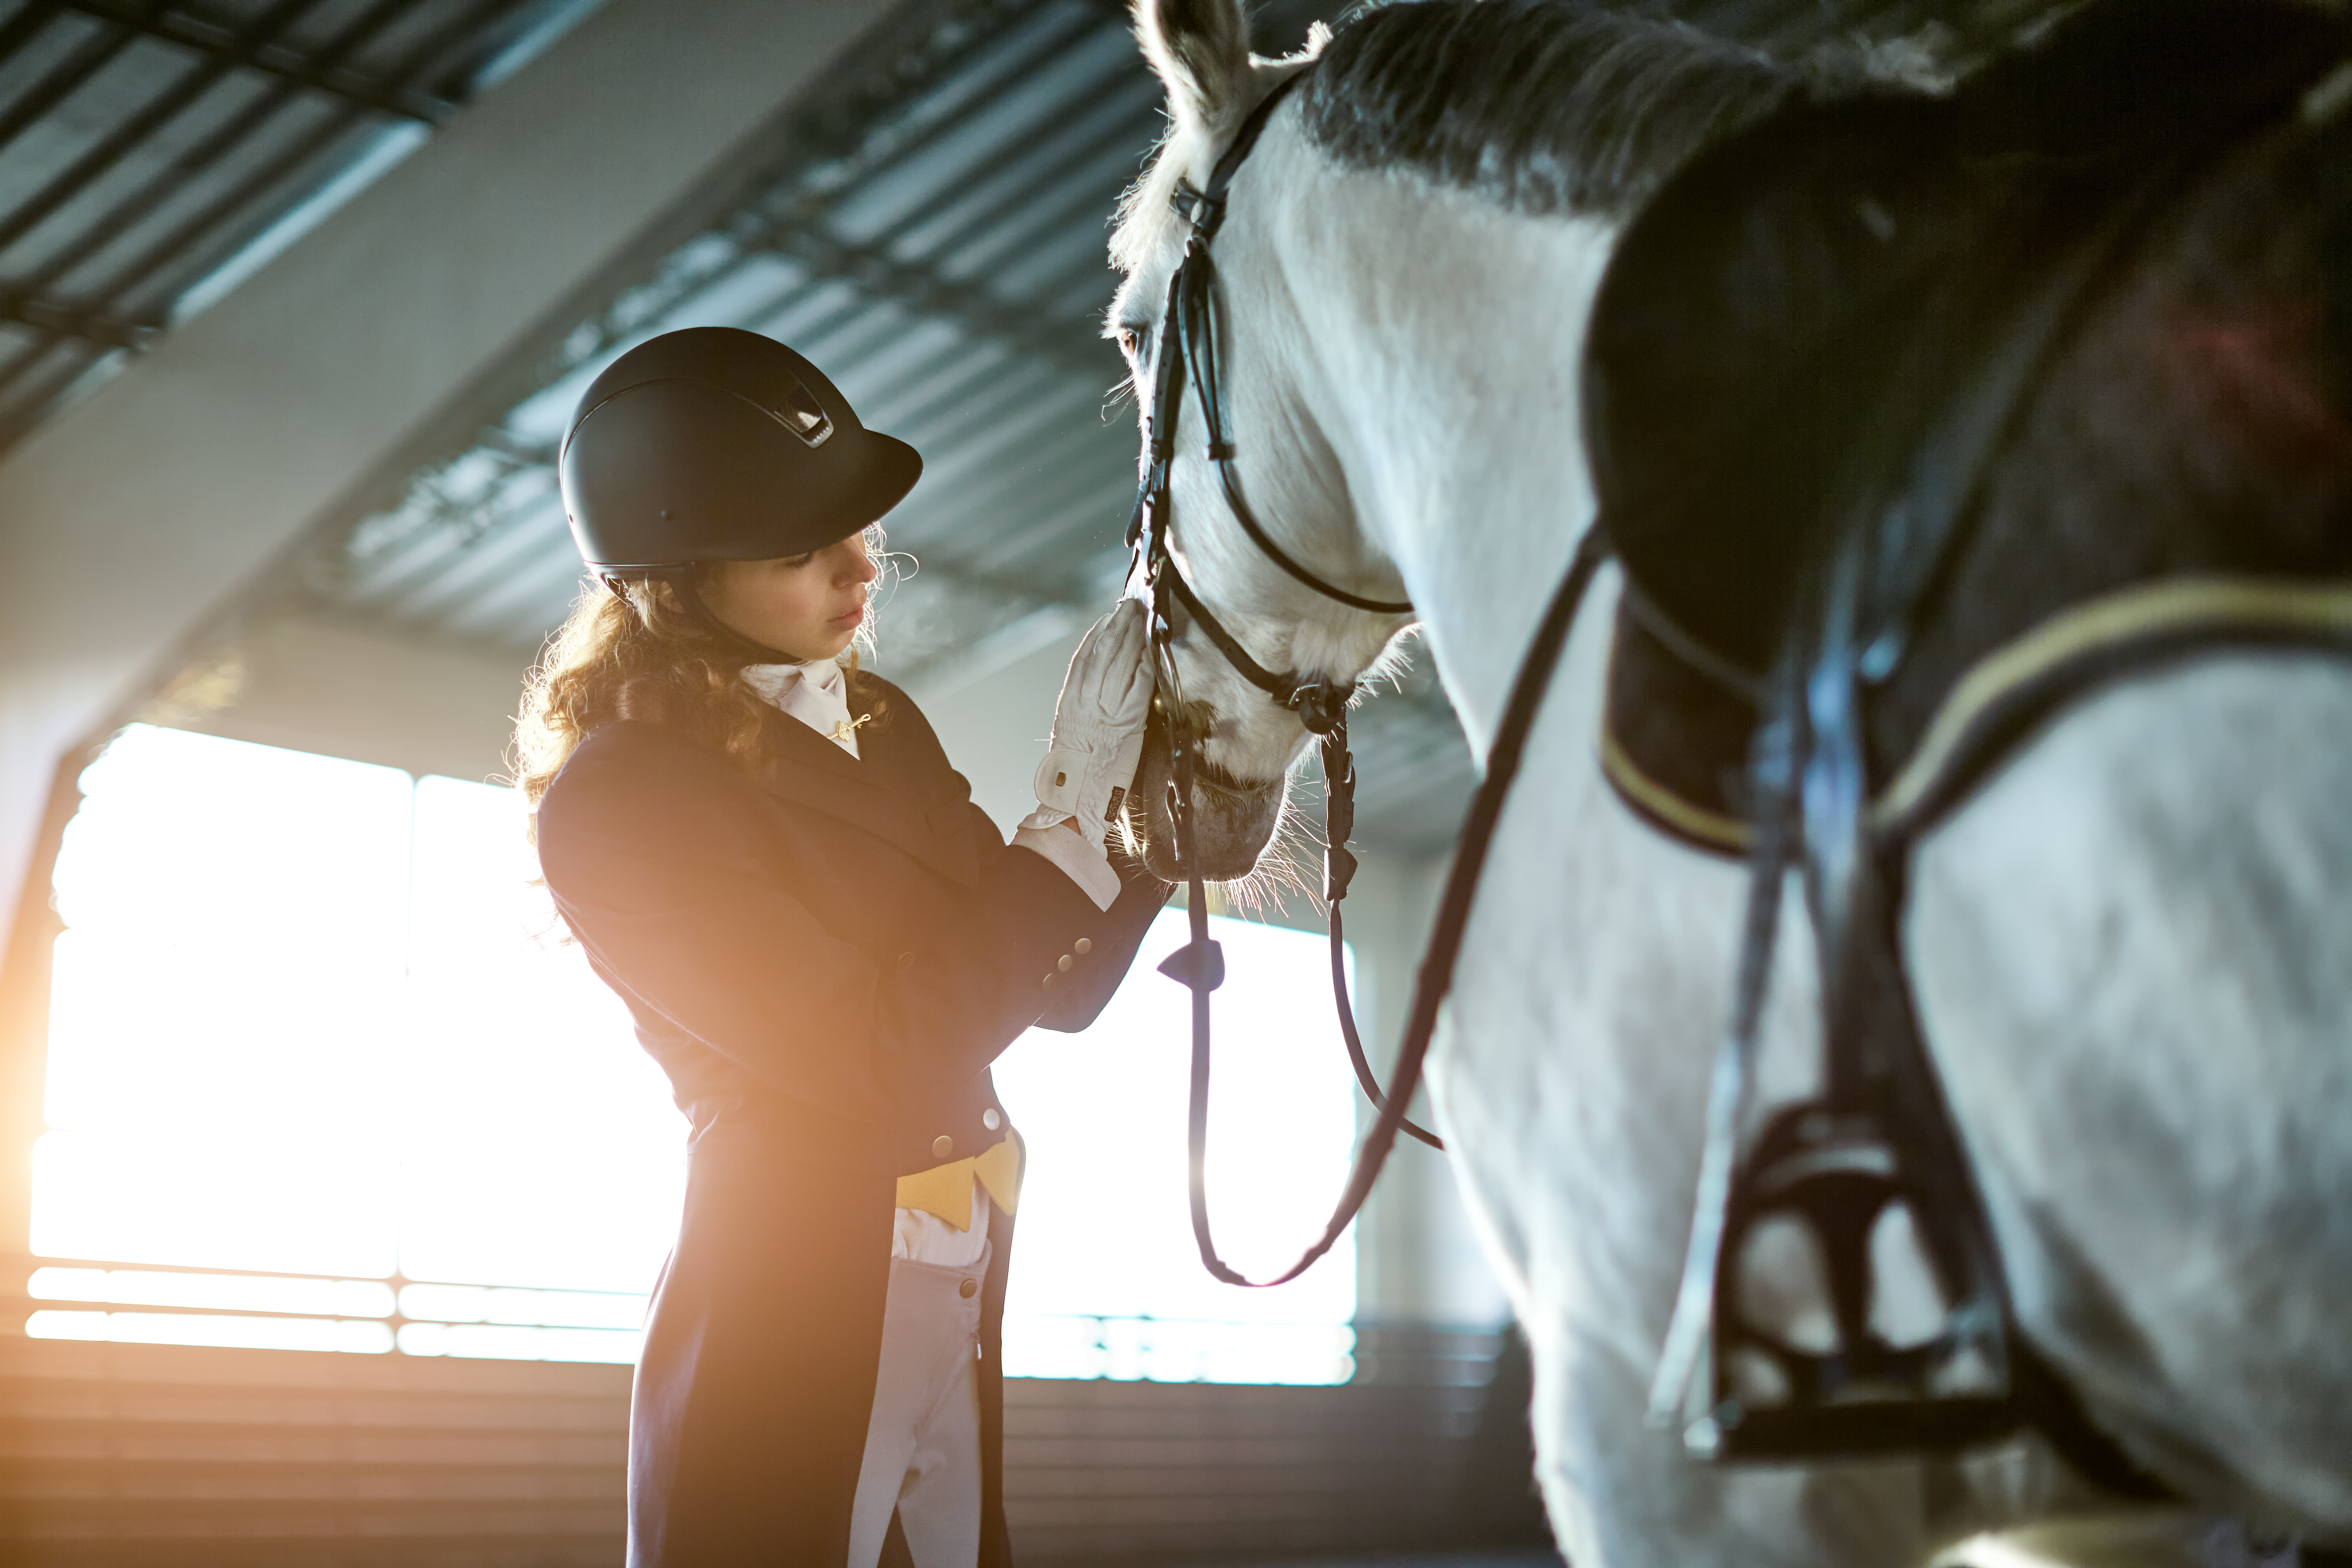 Planning on Purchasing a Riding Arena? Read Here Before You Do.